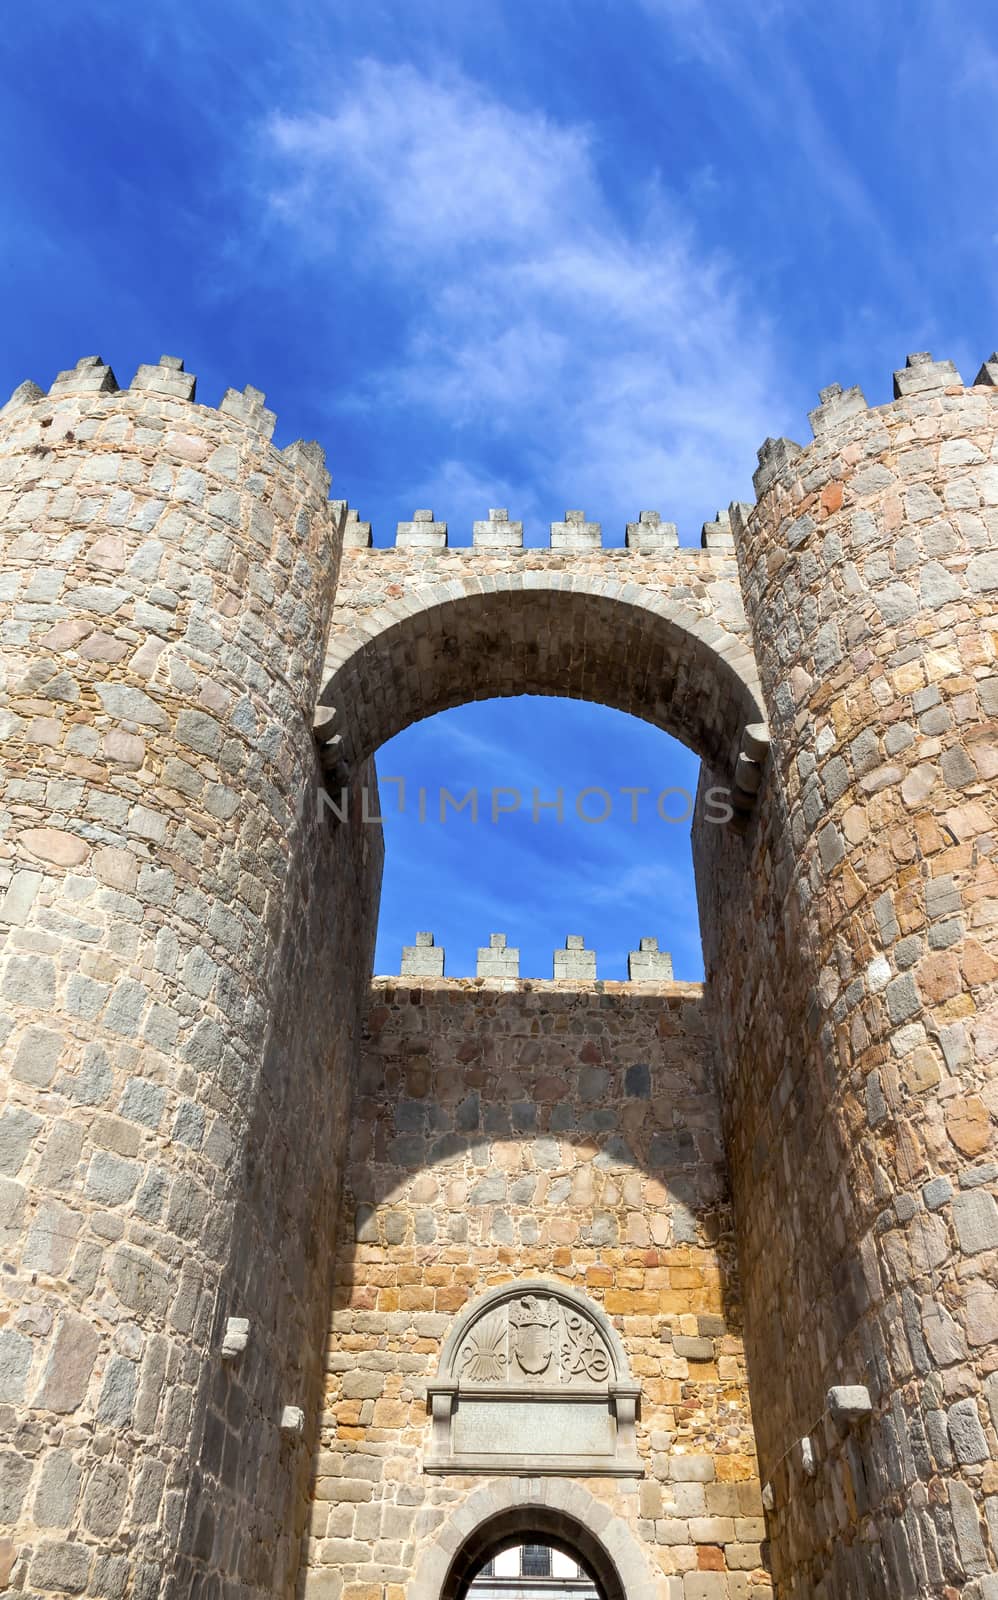 Castle Town Walls Arch Gate Avila Castile Spain.  Described as the most 16th century town in Spain.  Walls created in 1088 after Christians conquer and take the city from the Moors.  Public town, not a private castle.  